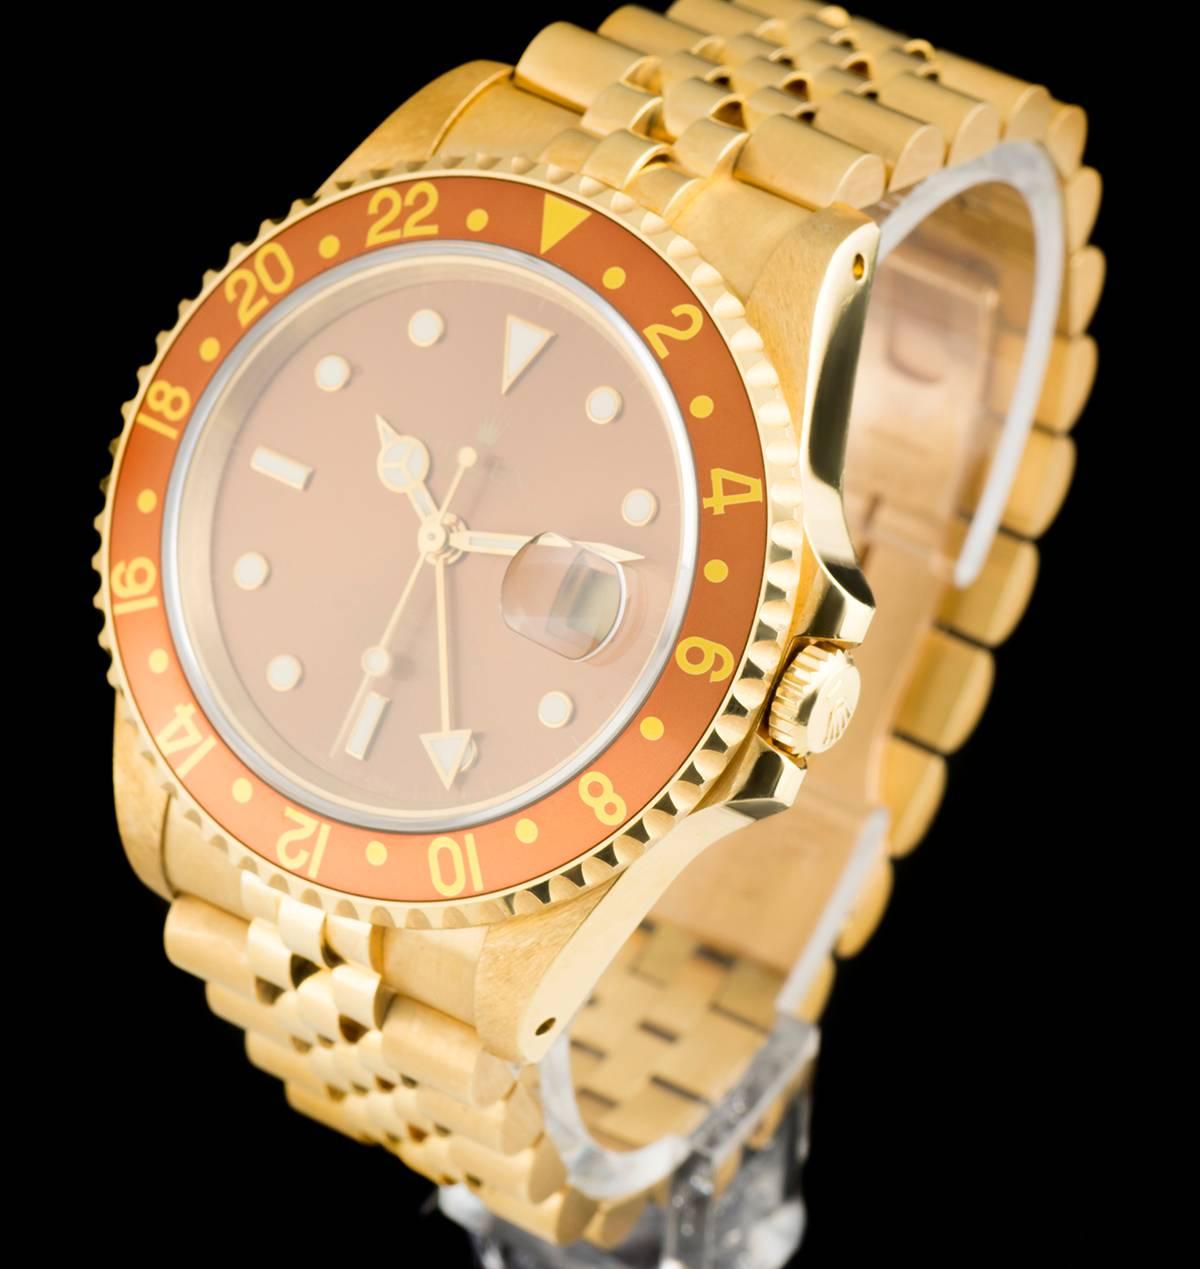 An 18k Yellow Gold Oyster Perpetual GMT-Master II Gents Wristwatch, brown dial with applied hour markers, date at 3 0'clock, an 18k yellow gold bi-directional rotating bezel with a "root beer" bezel insert, an 18k yellow gold jubilee